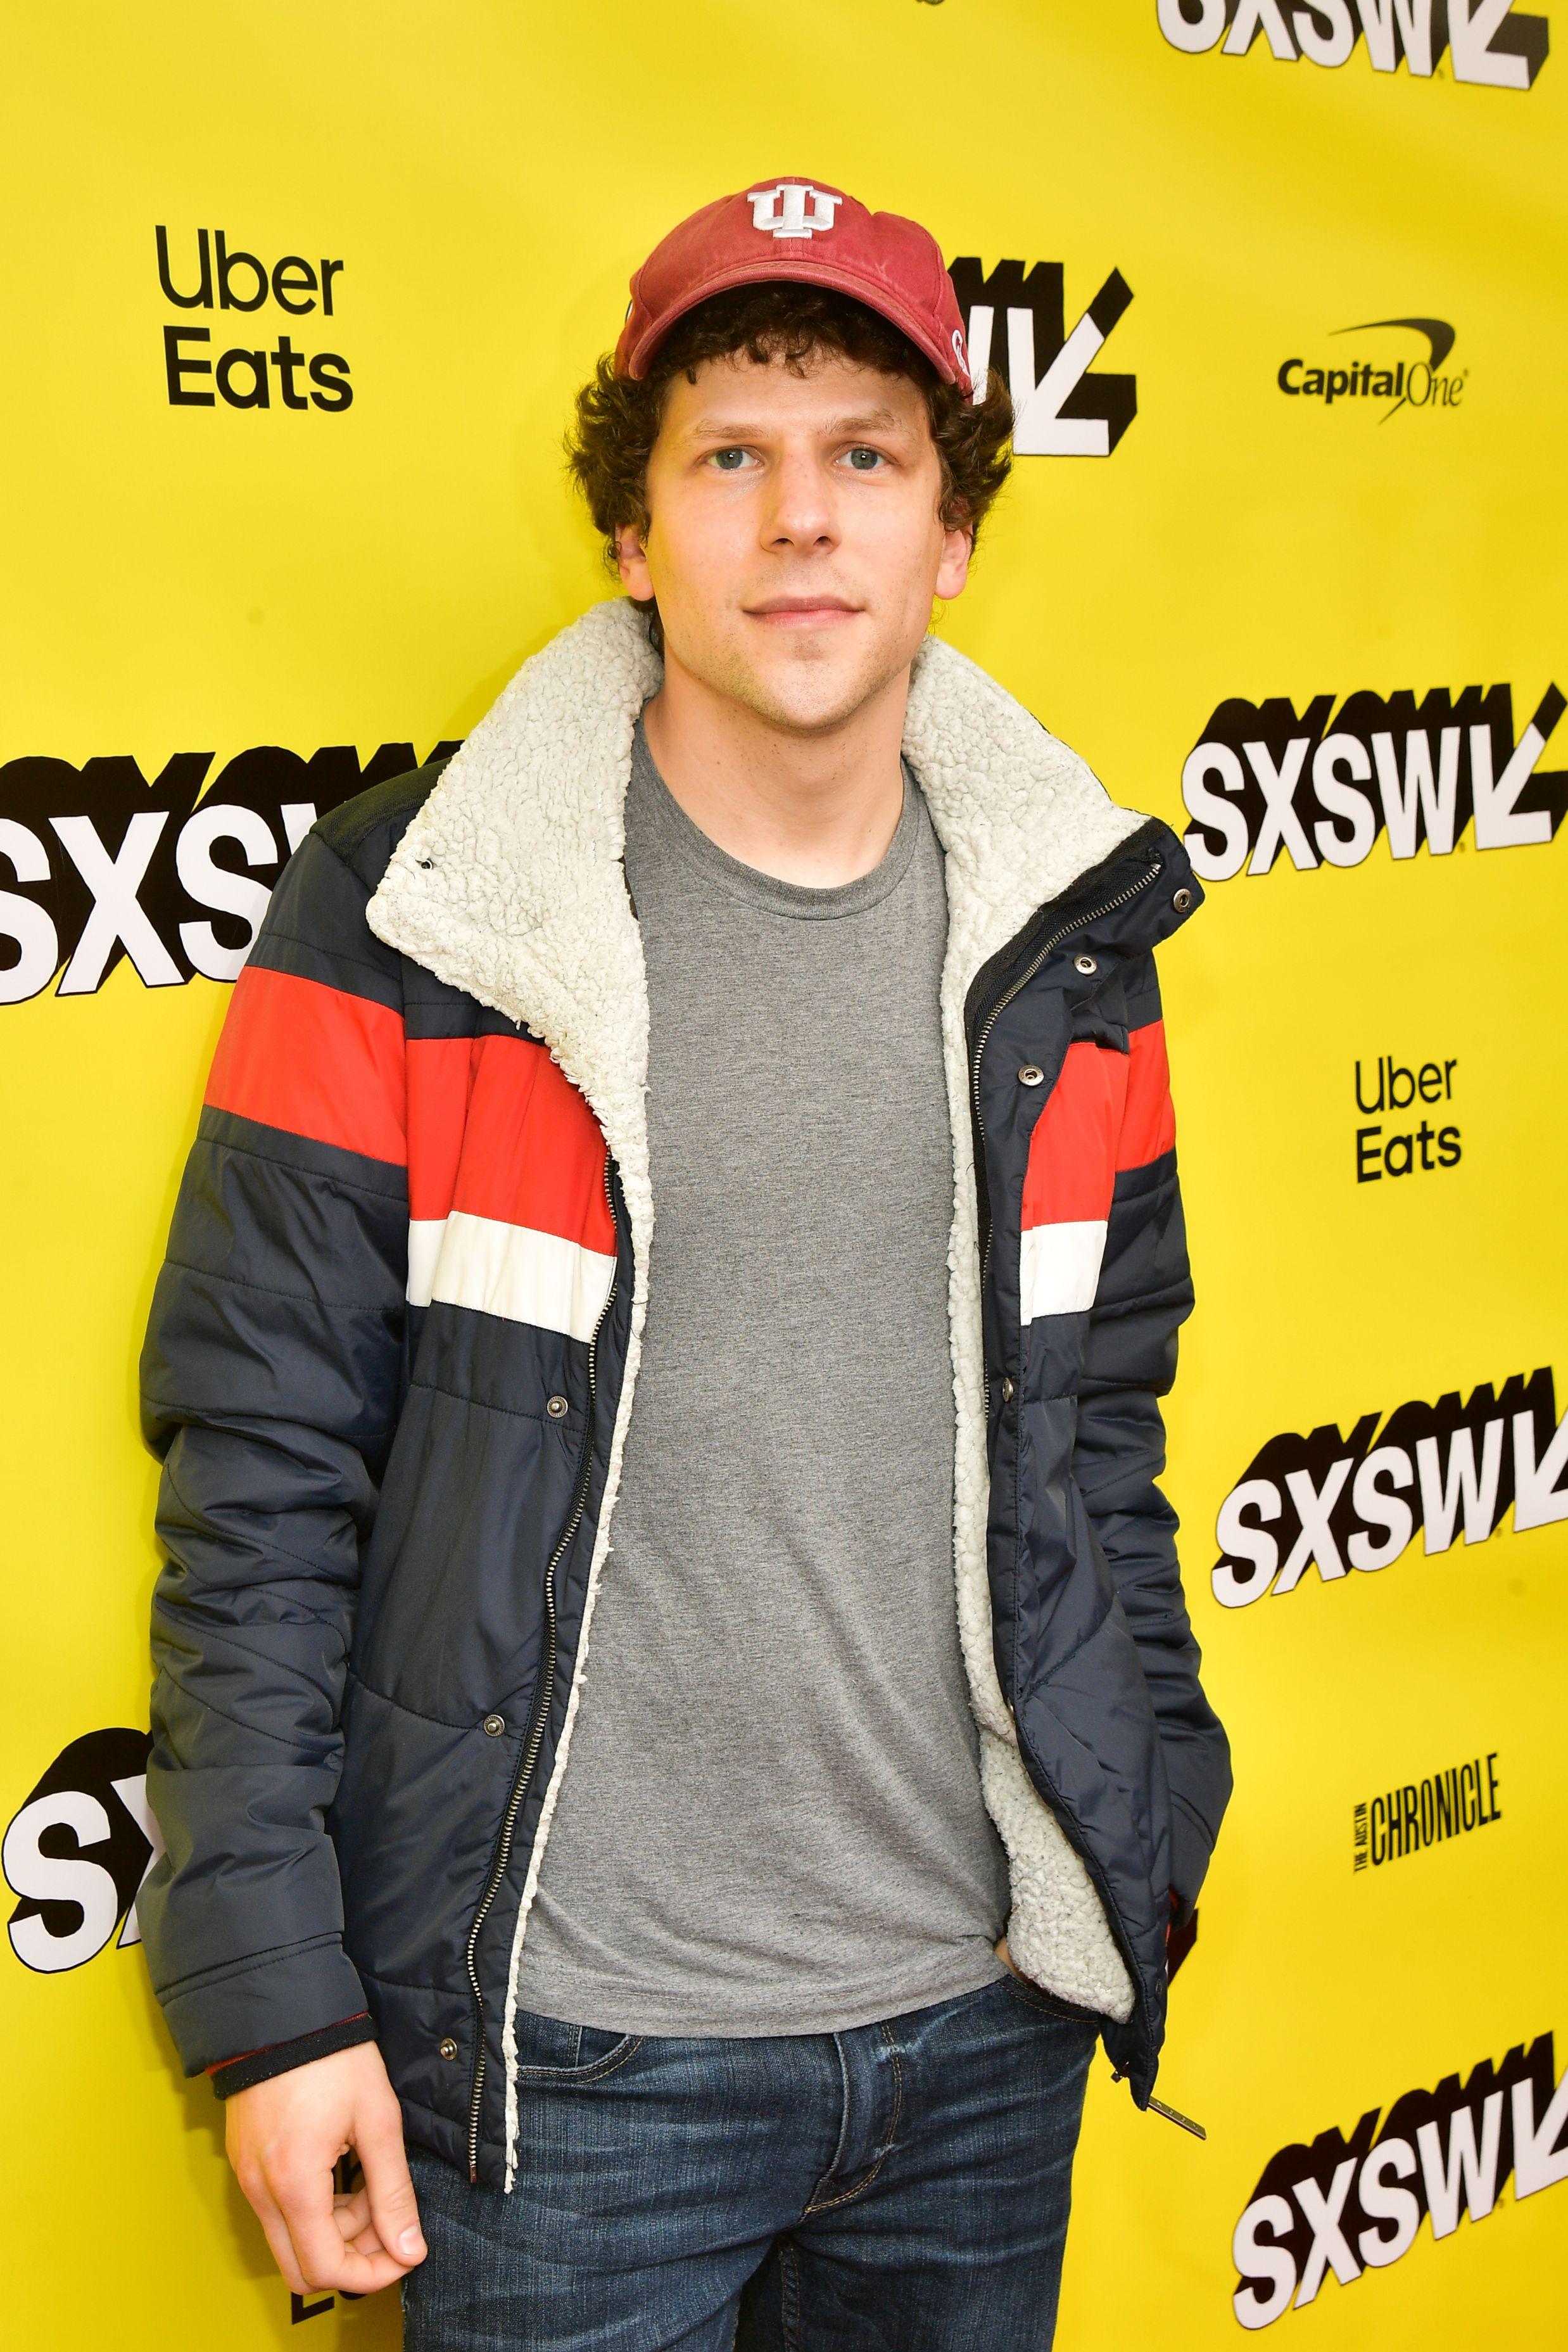 Jesse Eisenberg Attends The The Art Of Self Defense Premiere 2019 SXSW Conference And Festivals At Paramount Theatre On March 2019 In Austin, Texas. Image. SXSW Conference & Festivals Art Of Self Defense Movie Wallpaper